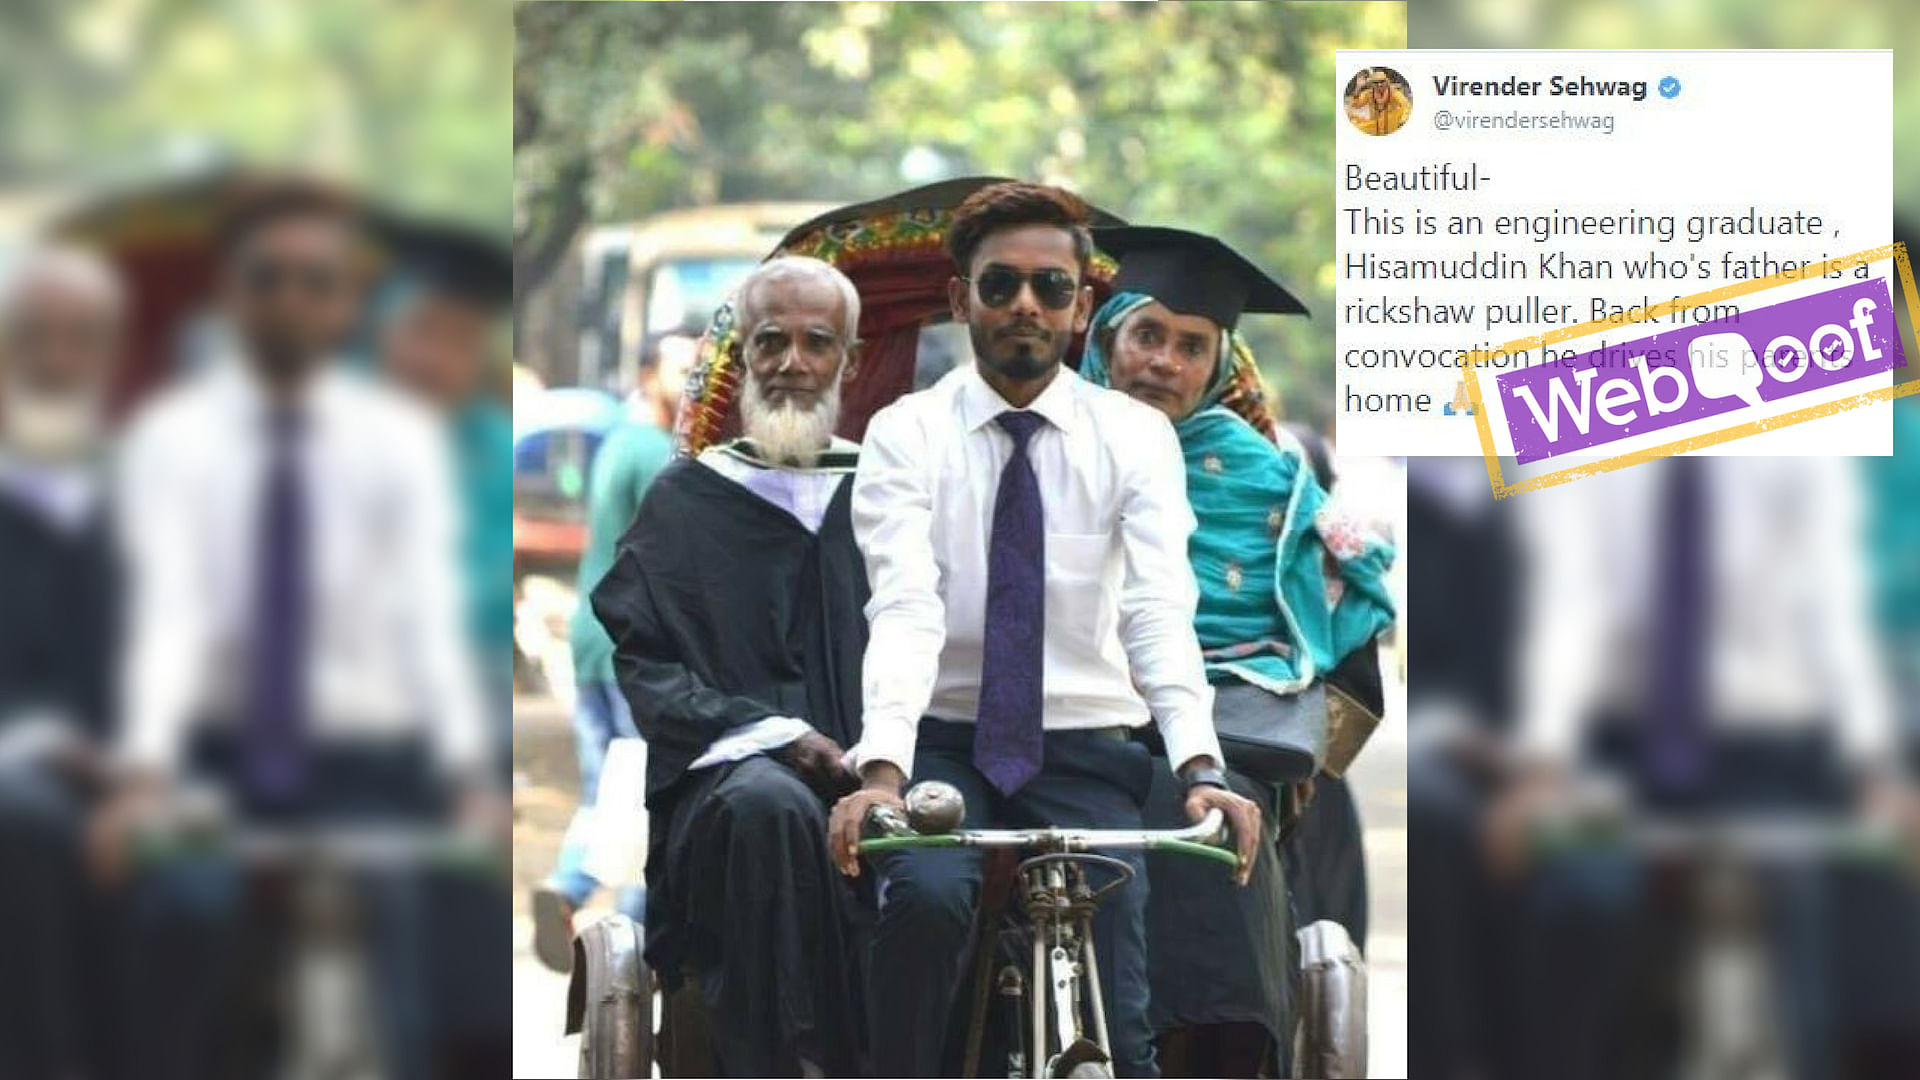  The photo shared on social media claims that the man in the picture is son of a rickshaw puller.&nbsp;